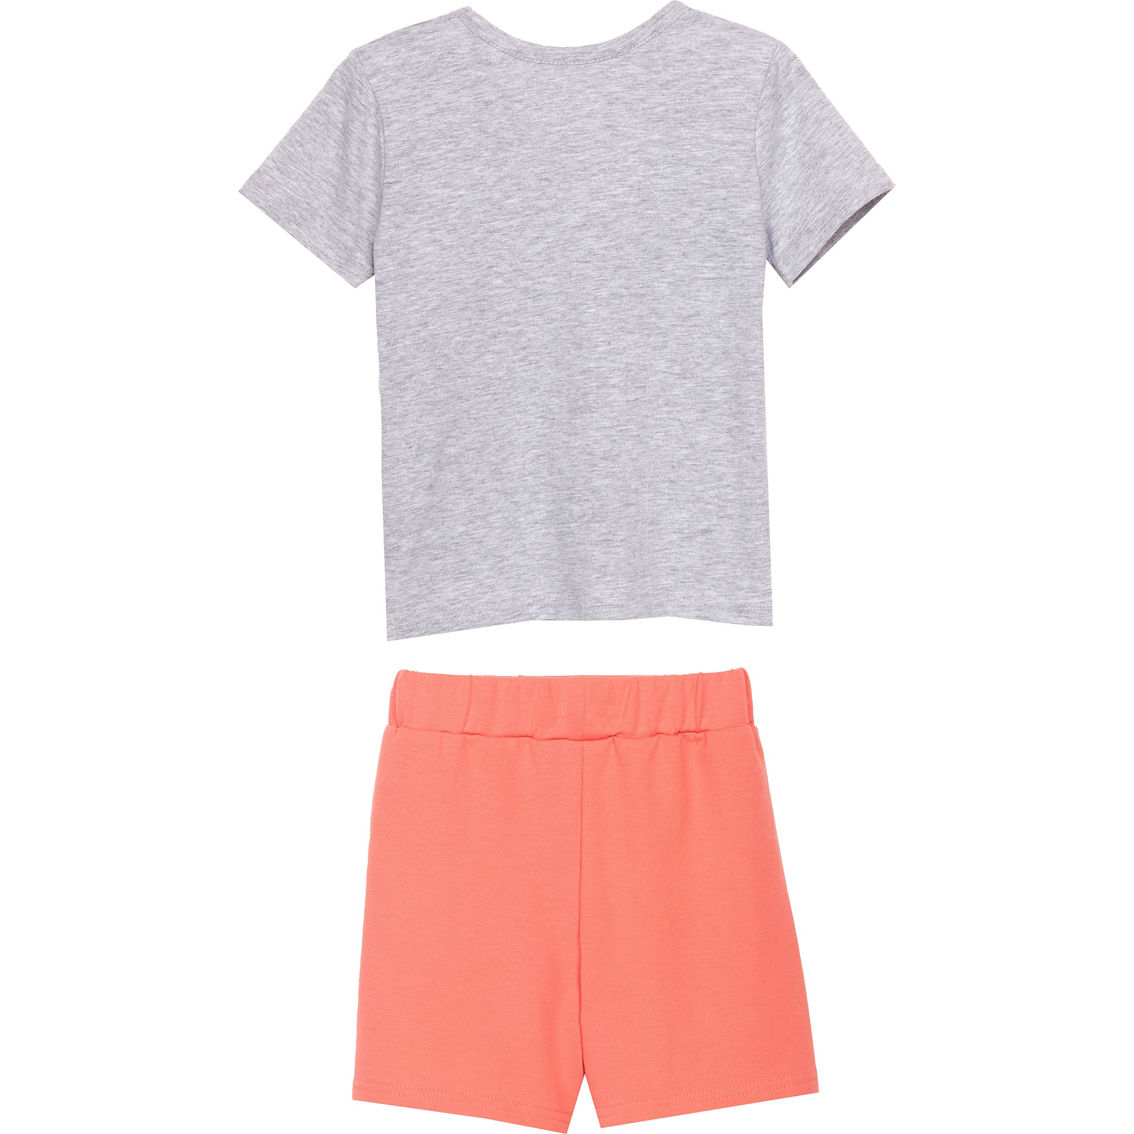 Buzz Cuts Little Boys Graphic Tee and Shorts 2 pc. Set - Image 2 of 2